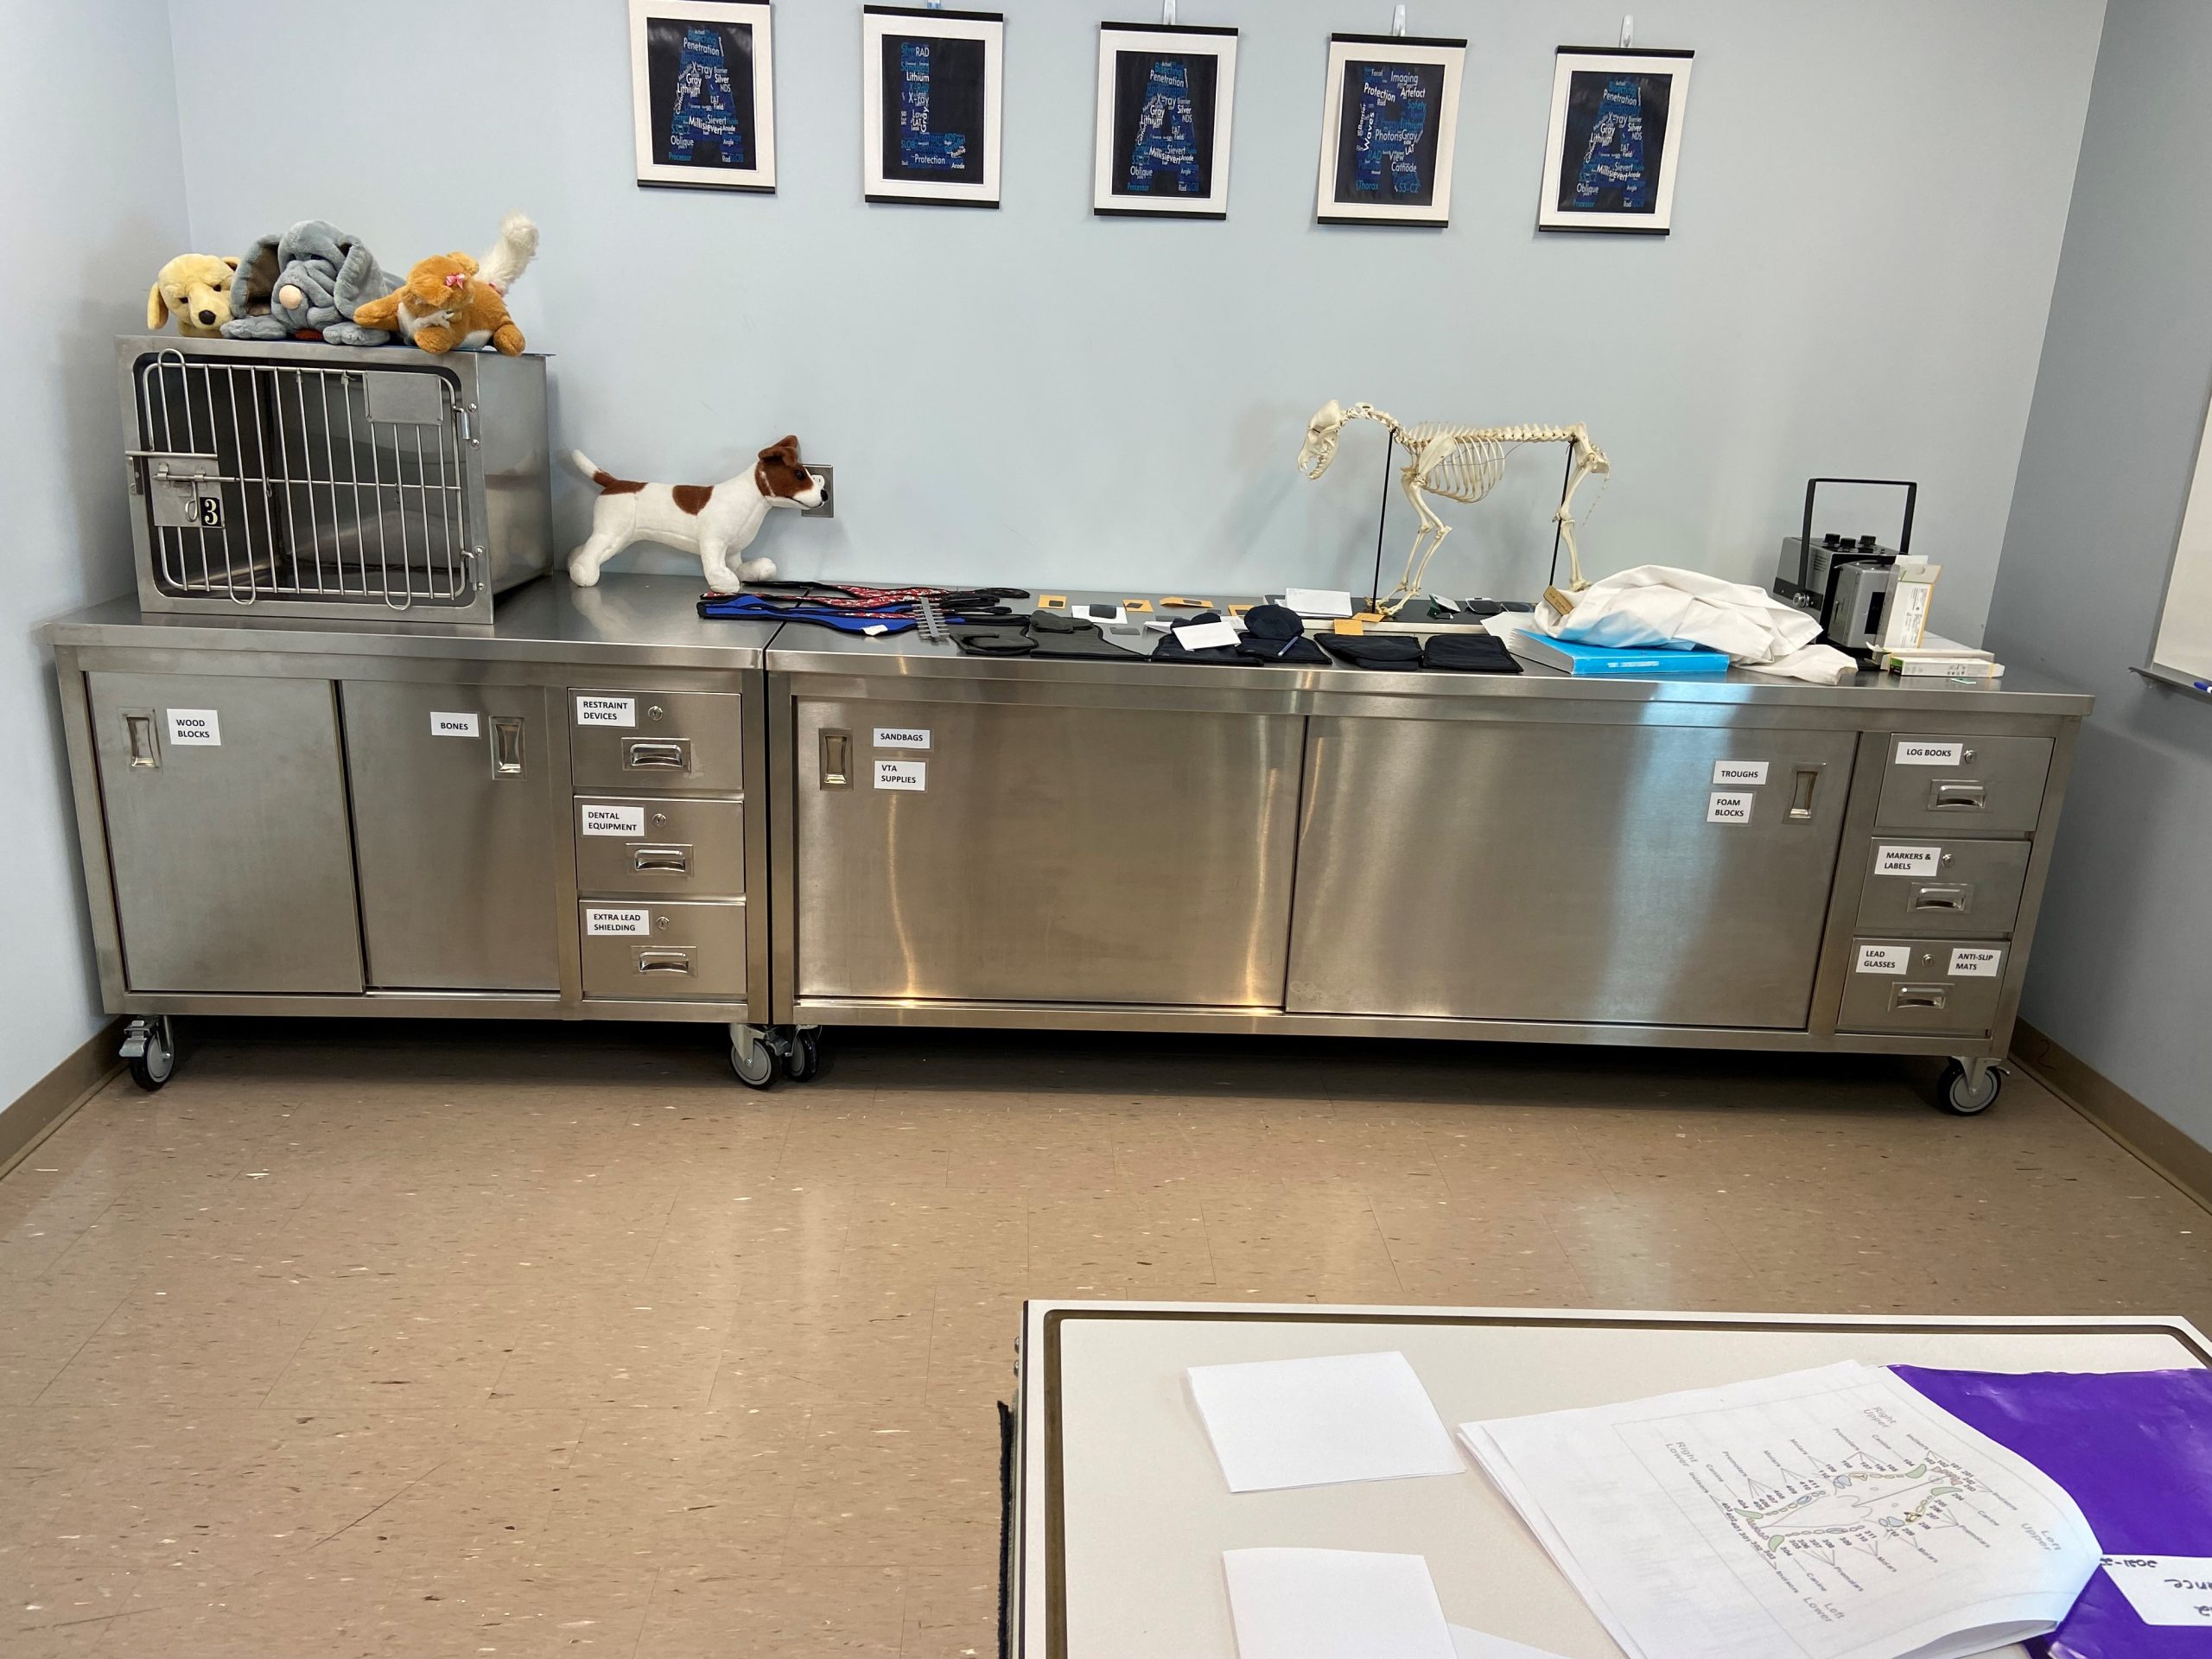 stainless steel cabinets with dog stuffed toys and a cage on top